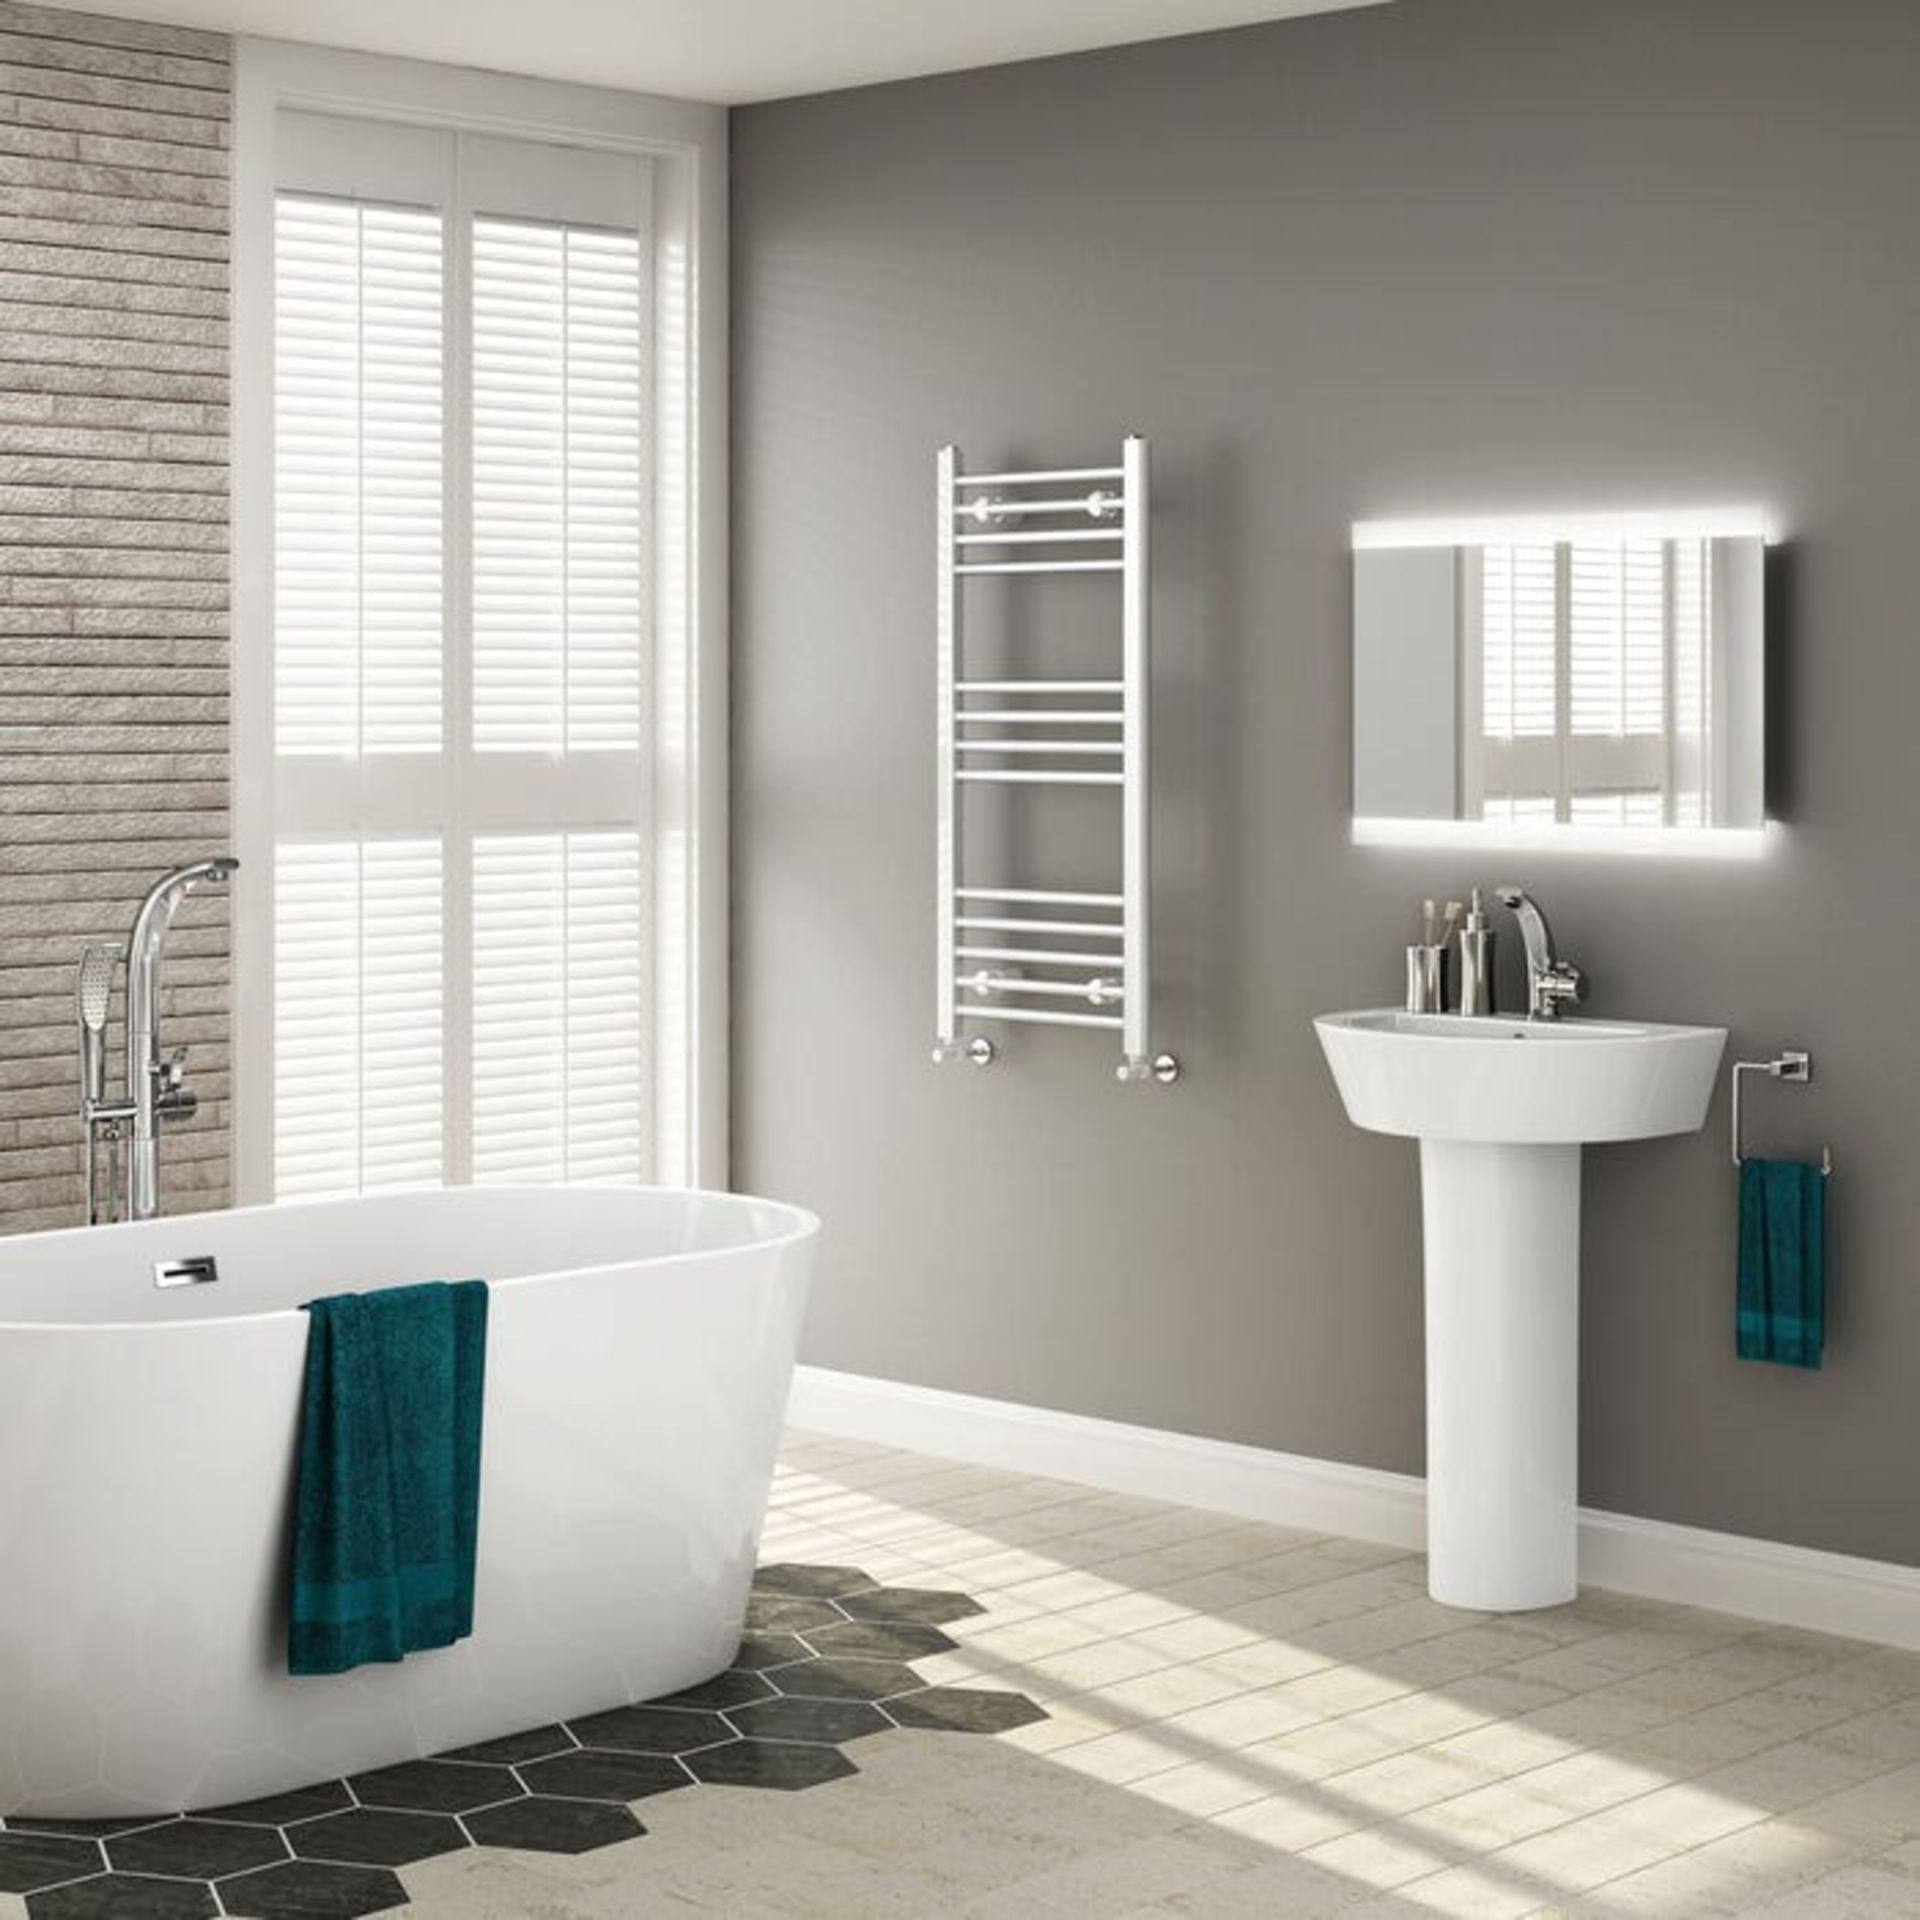 (VD158) 900x500mm White Basic Towel radiator High gloss White.RRP £165.99.Made from low-carbon... - Image 2 of 3